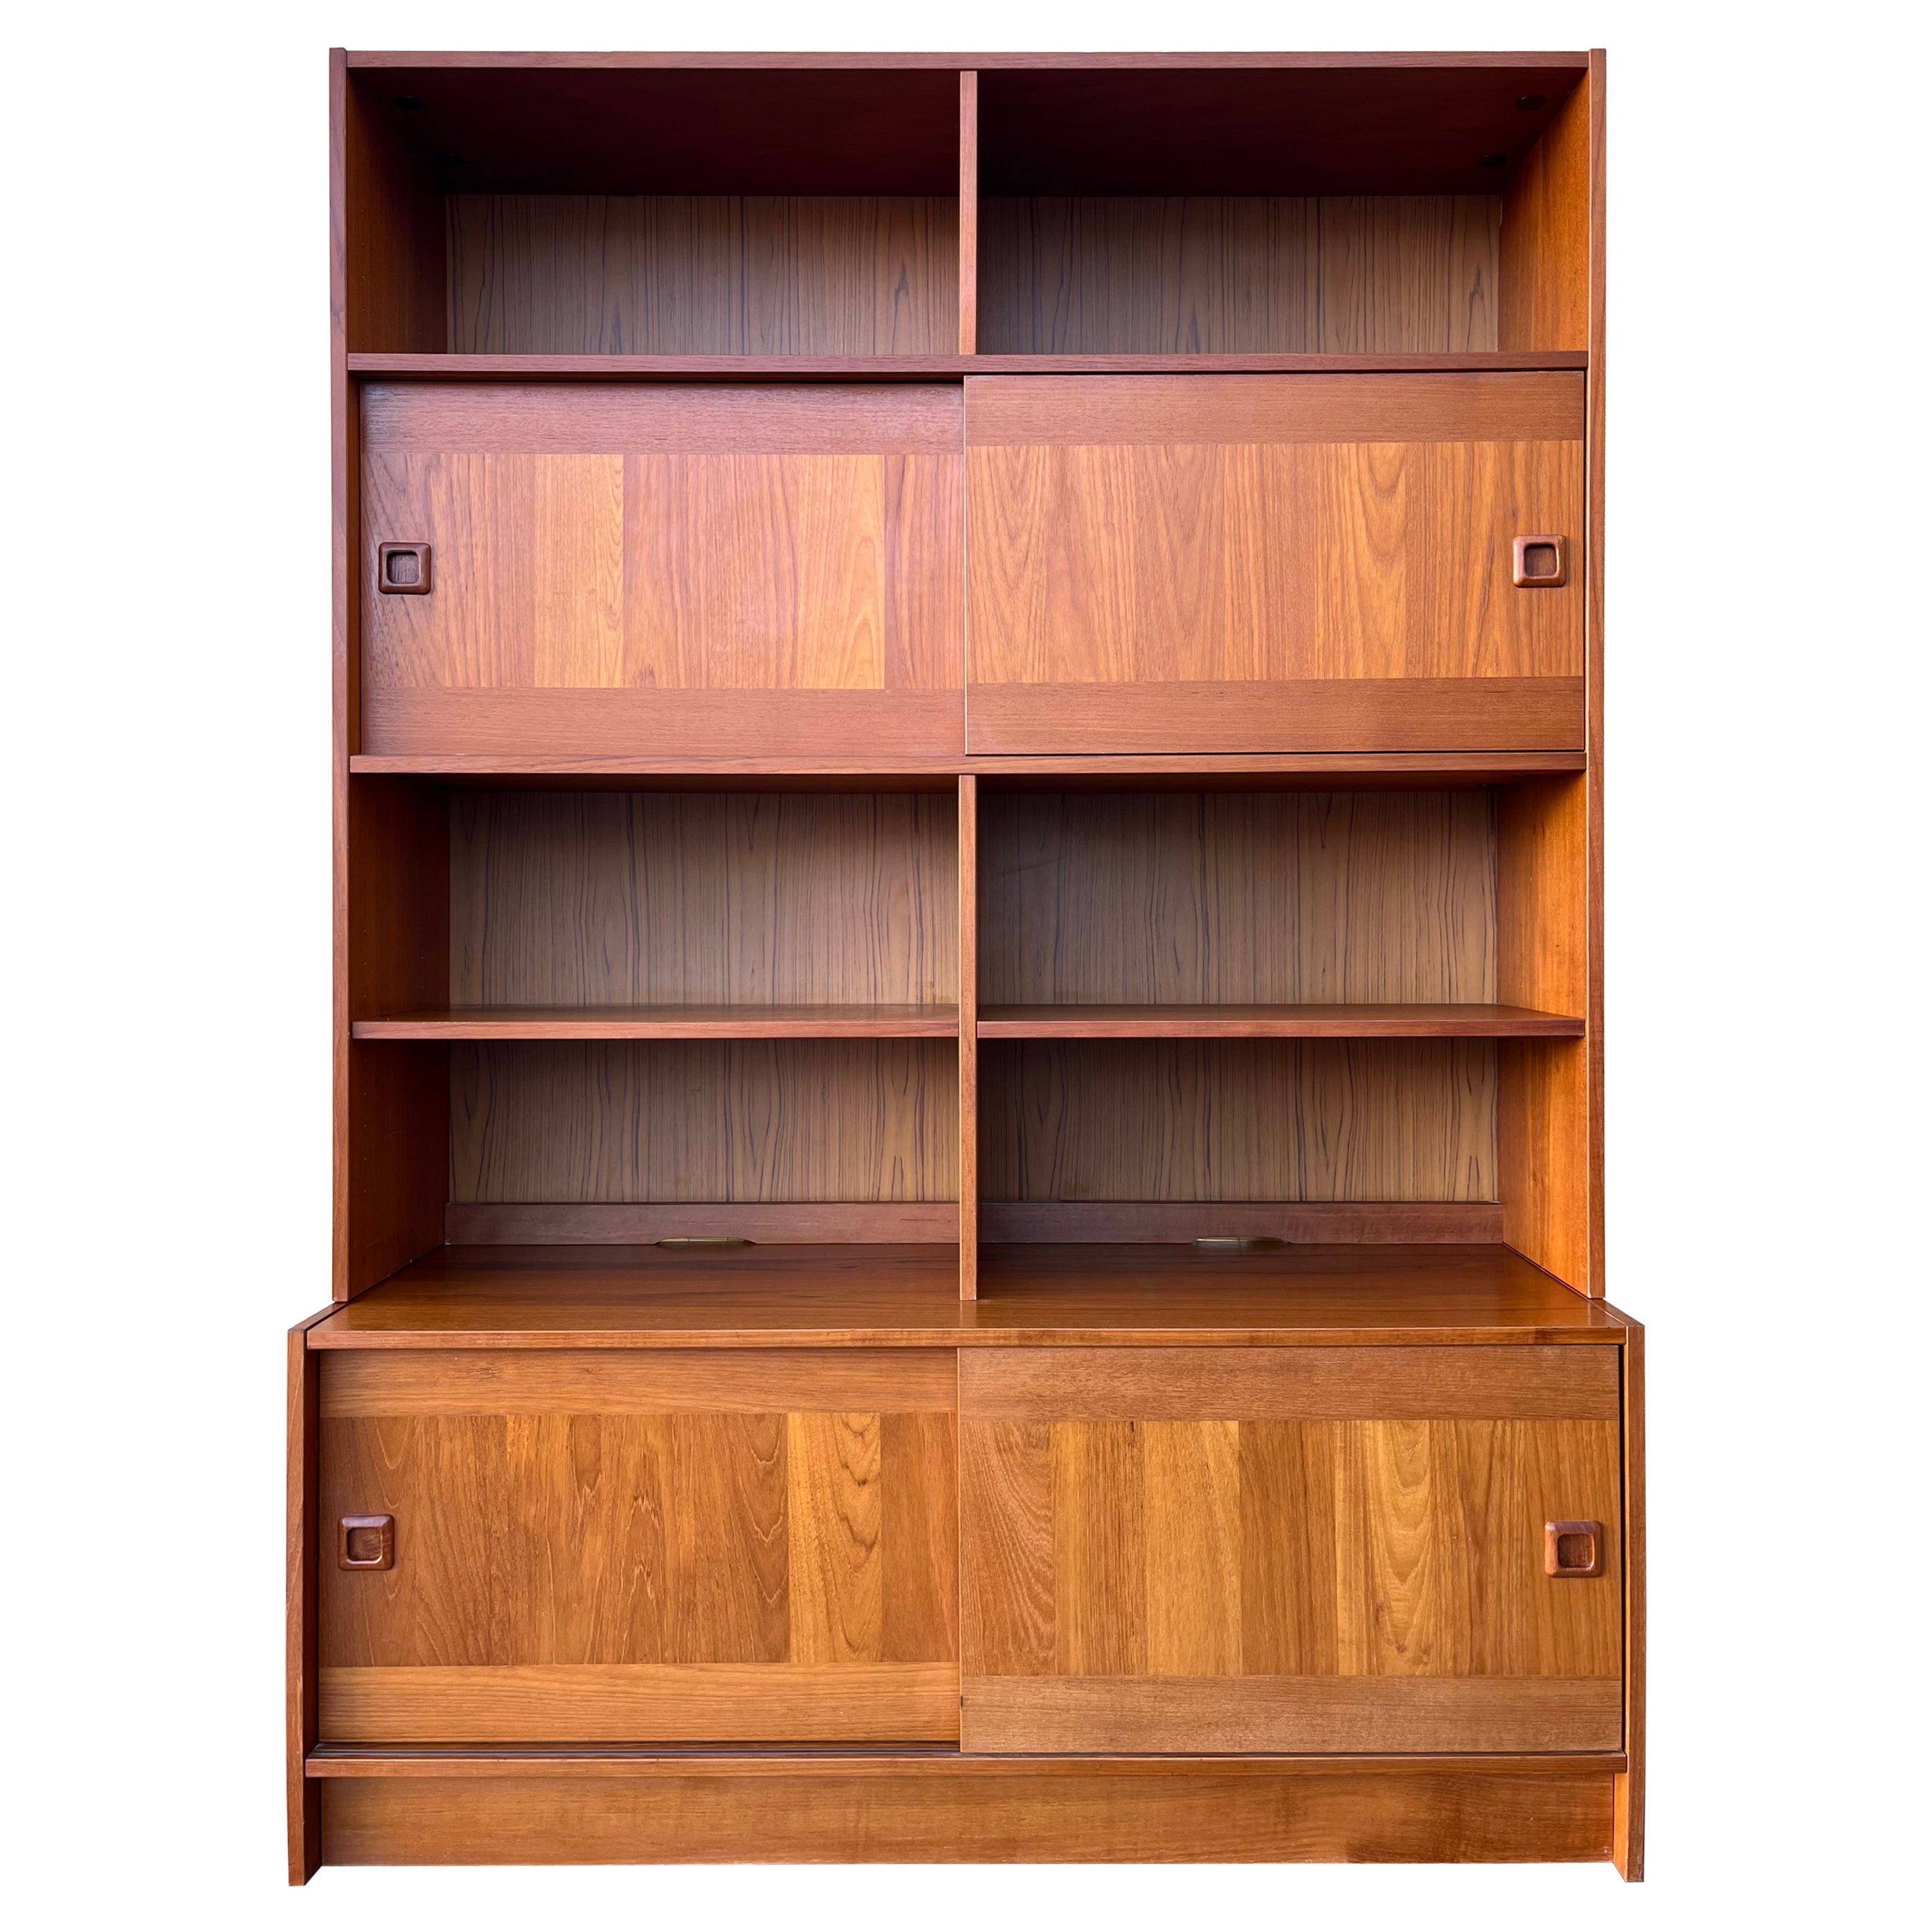 Danish Mid Century Modern Shelving Cabinet by Domino Mobler. Circa 1970s For Sale